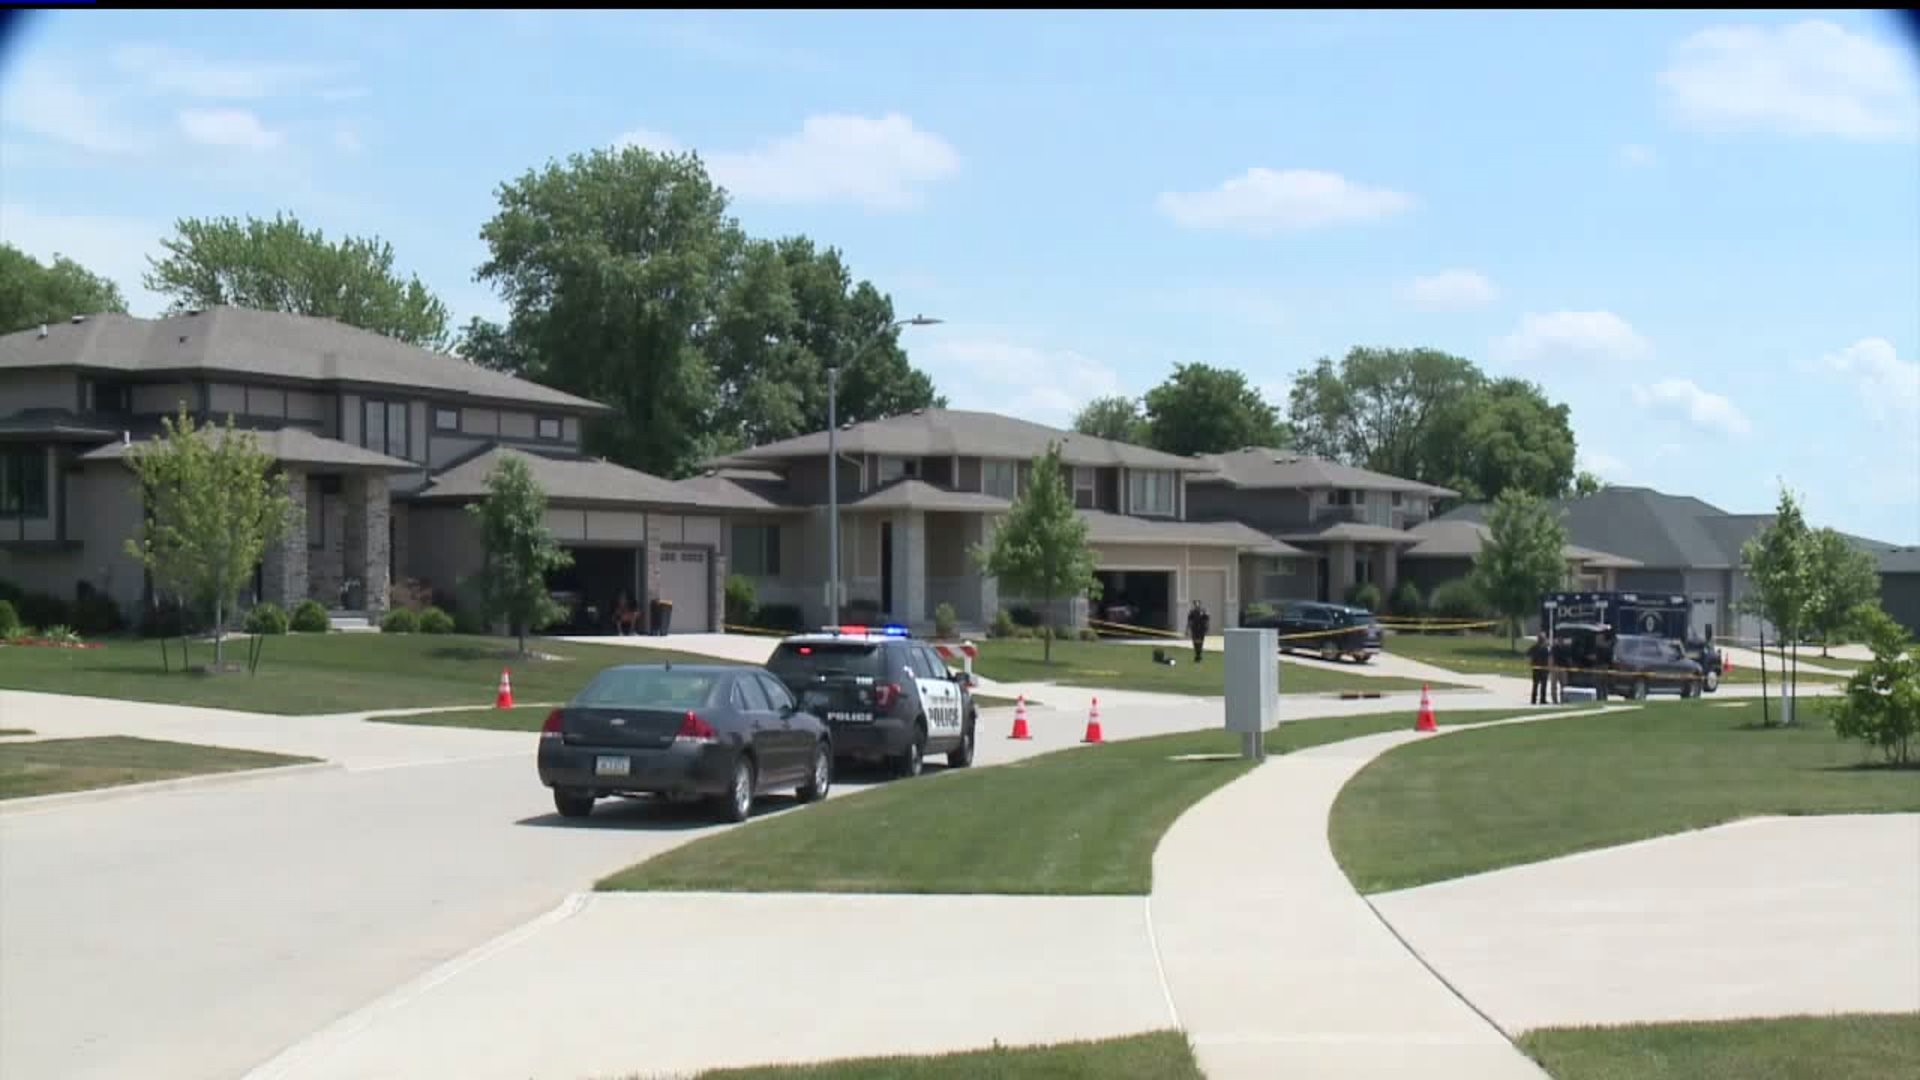 Family of four shot and killed in West Des Moines neighborhood